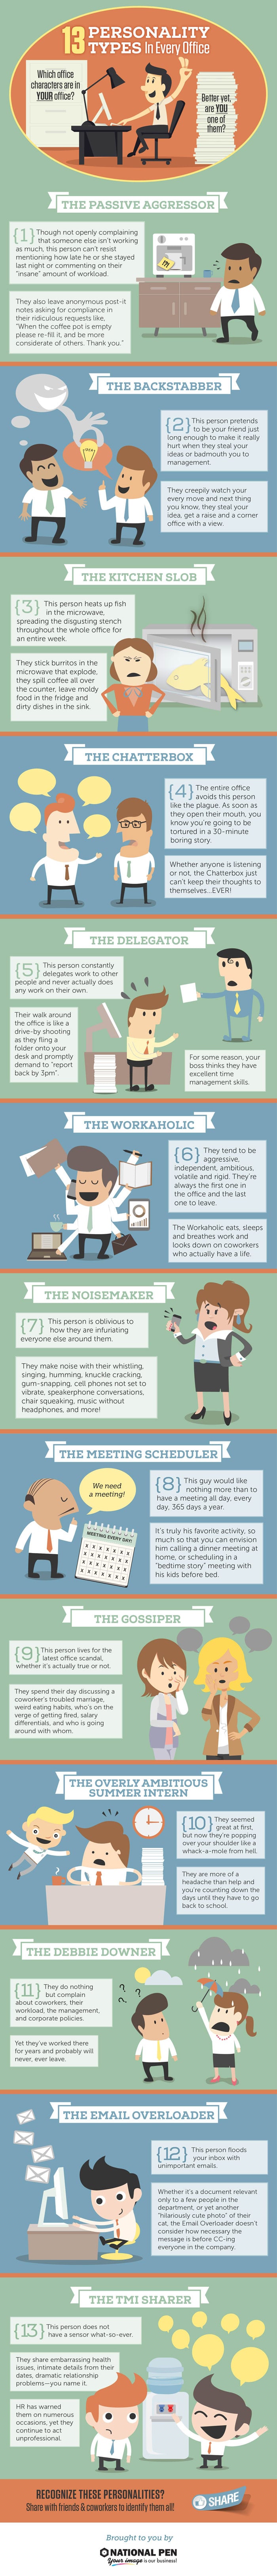 13 Personality Types Found In Almost Every Busy Office [Infographic]